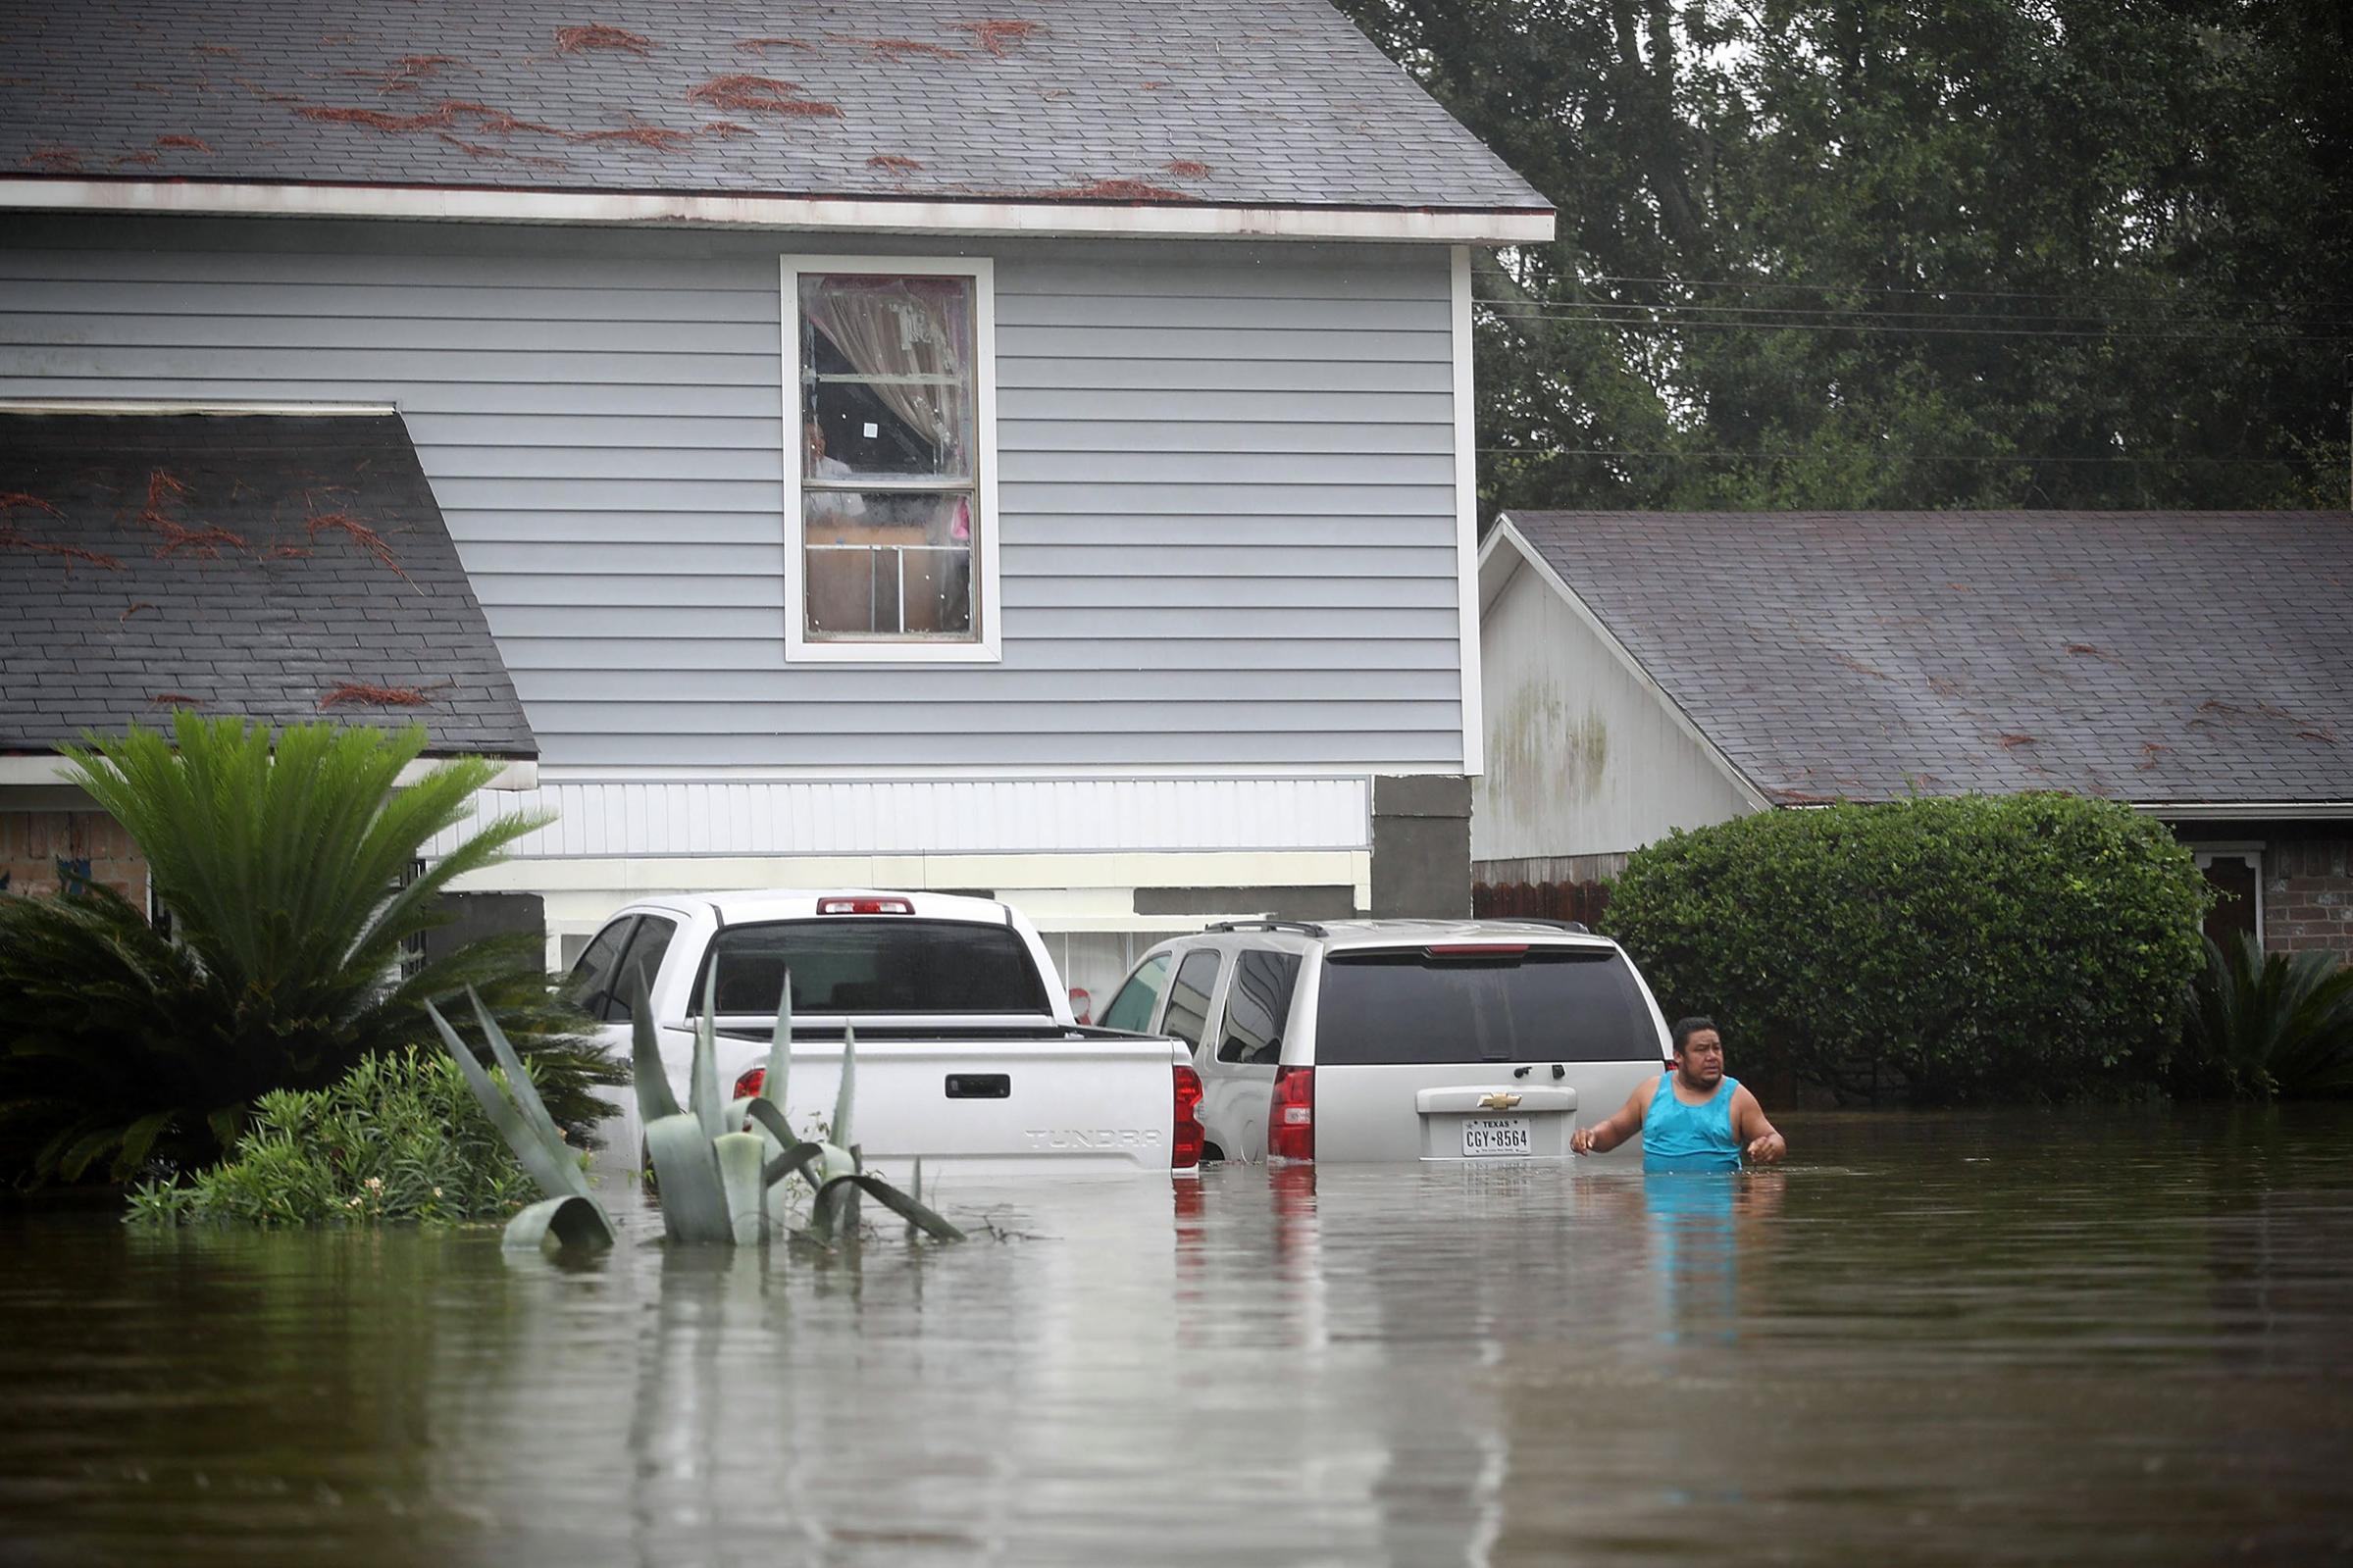 People wait to be rescued from their flooded homes after the area was inundated with flooding from Hurricane Harvey on August 28, 2017 in Houston, Texas.